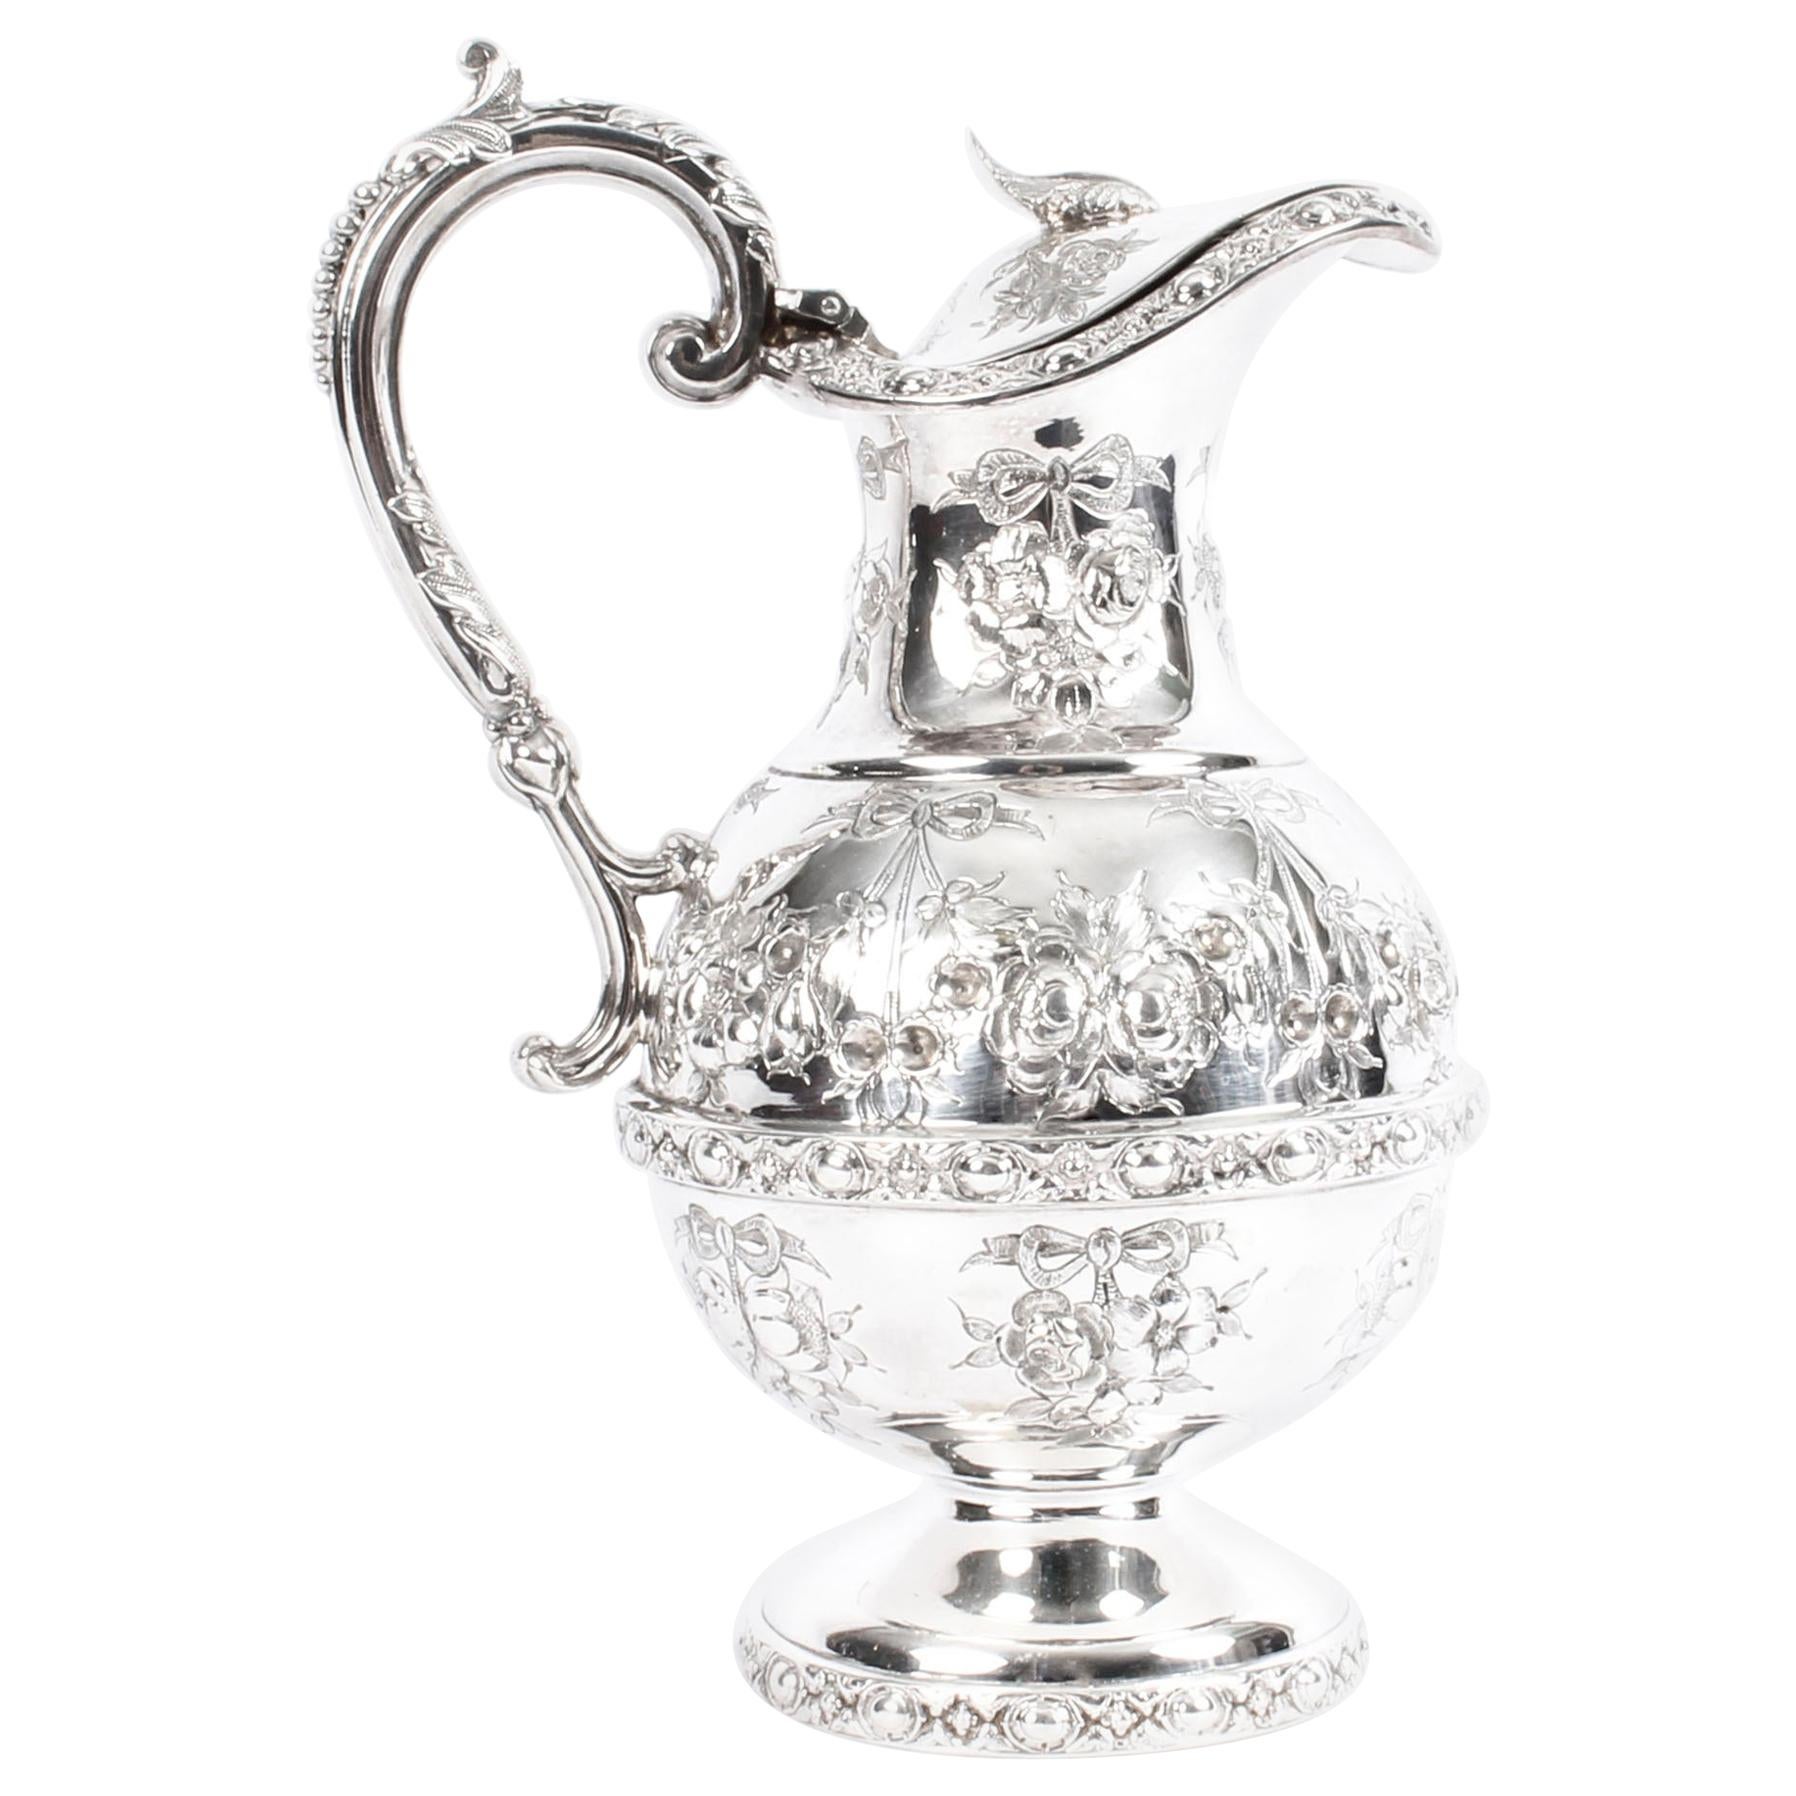 Antique Victorian Silver Plate Claret Jug by Martin Hall, 19th Century